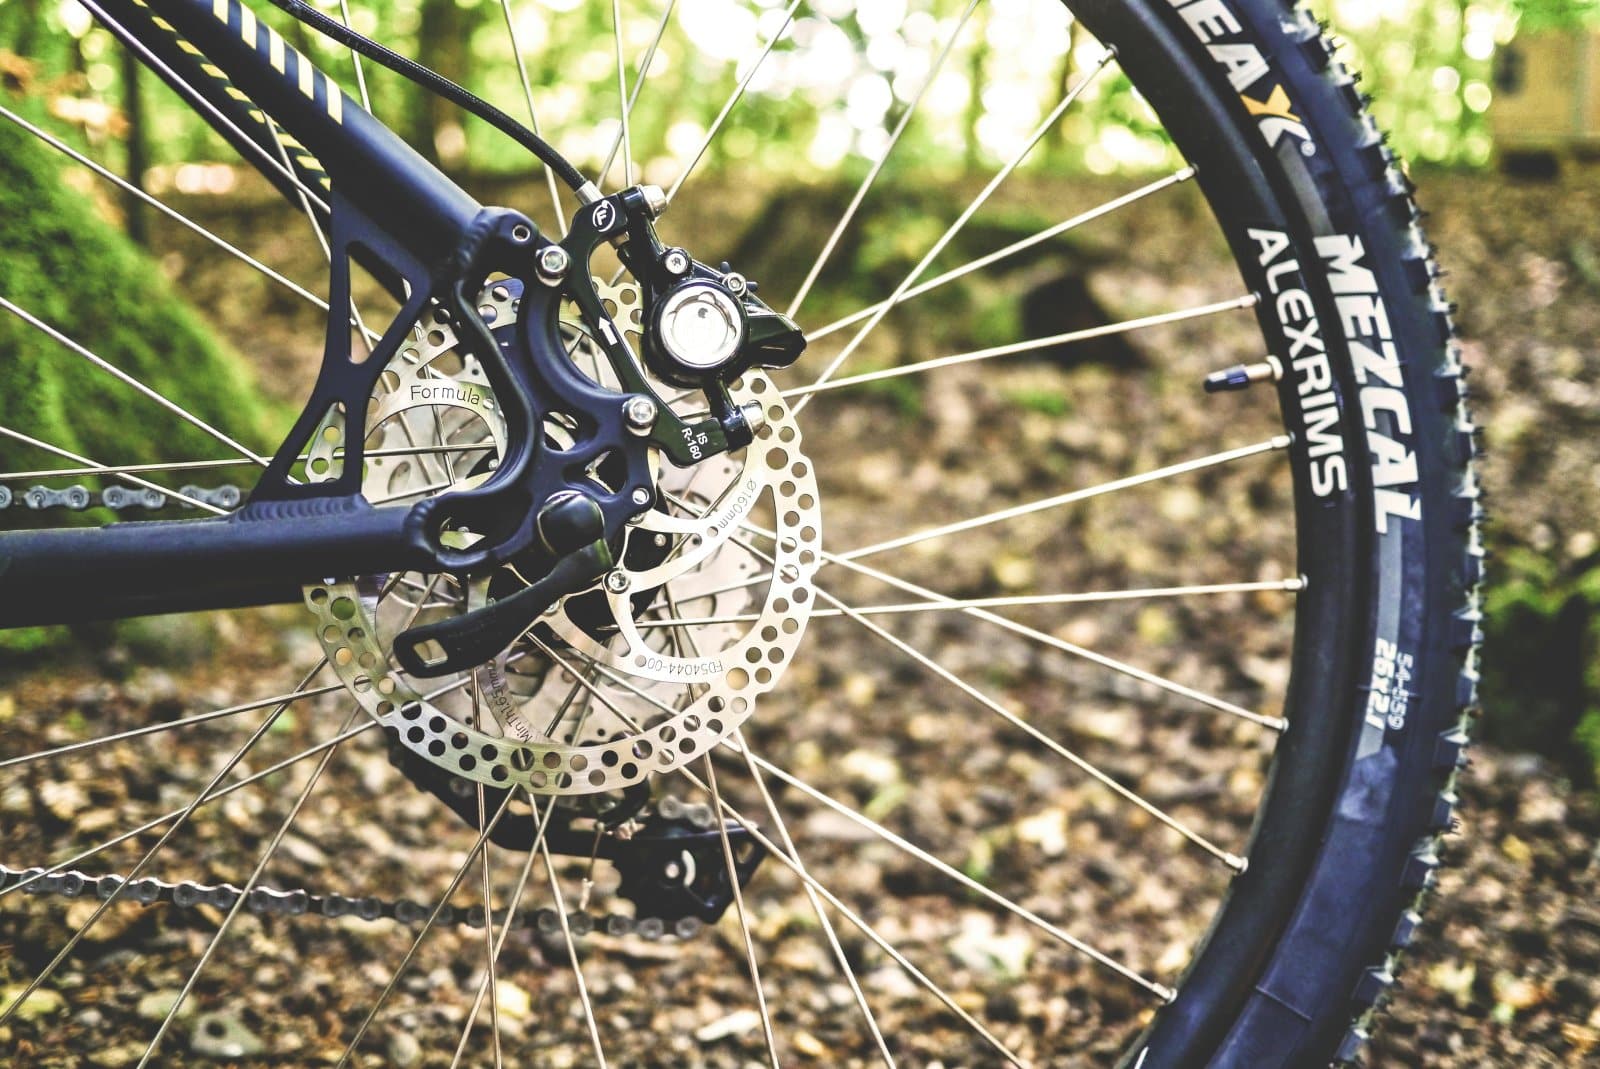 <p class="wp-caption-text">Image Credit: Pexels / Lum3n</p>  <p><span>The importance of preparing your gear for a cycling tour cannot be overstated. Your bicycle should be suited to the terrain of your chosen destination—whether that means a rugged mountain bike for off-road trails or a lightweight road bike for smooth asphalt. Ensure your bike is in top condition with a thorough check-up and any necessary adjustments or repairs.</span></p> <p><span>Essential gear extends beyond your bike; it includes a helmet for safety, appropriate clothing for the weather, and a repair kit for on-the-go maintenance. </span><span>Consider how you’ll carry your essentials for multi-day tours, whether in panniers, a backpack, or a trailer.</span></p> <p><span>Comfort and reliability are key, so invest in quality gear that can withstand the demands of your journey. Remember, the right gear enhances your safety and comfort and your overall enjoyment of the tour.</span></p> <p><b>Insider’s Tip: </b><span>Test your gear on shorter rides before your tour. This practice helps identify any discomfort or technical issues that could become problematic on longer journeys.</span></p>